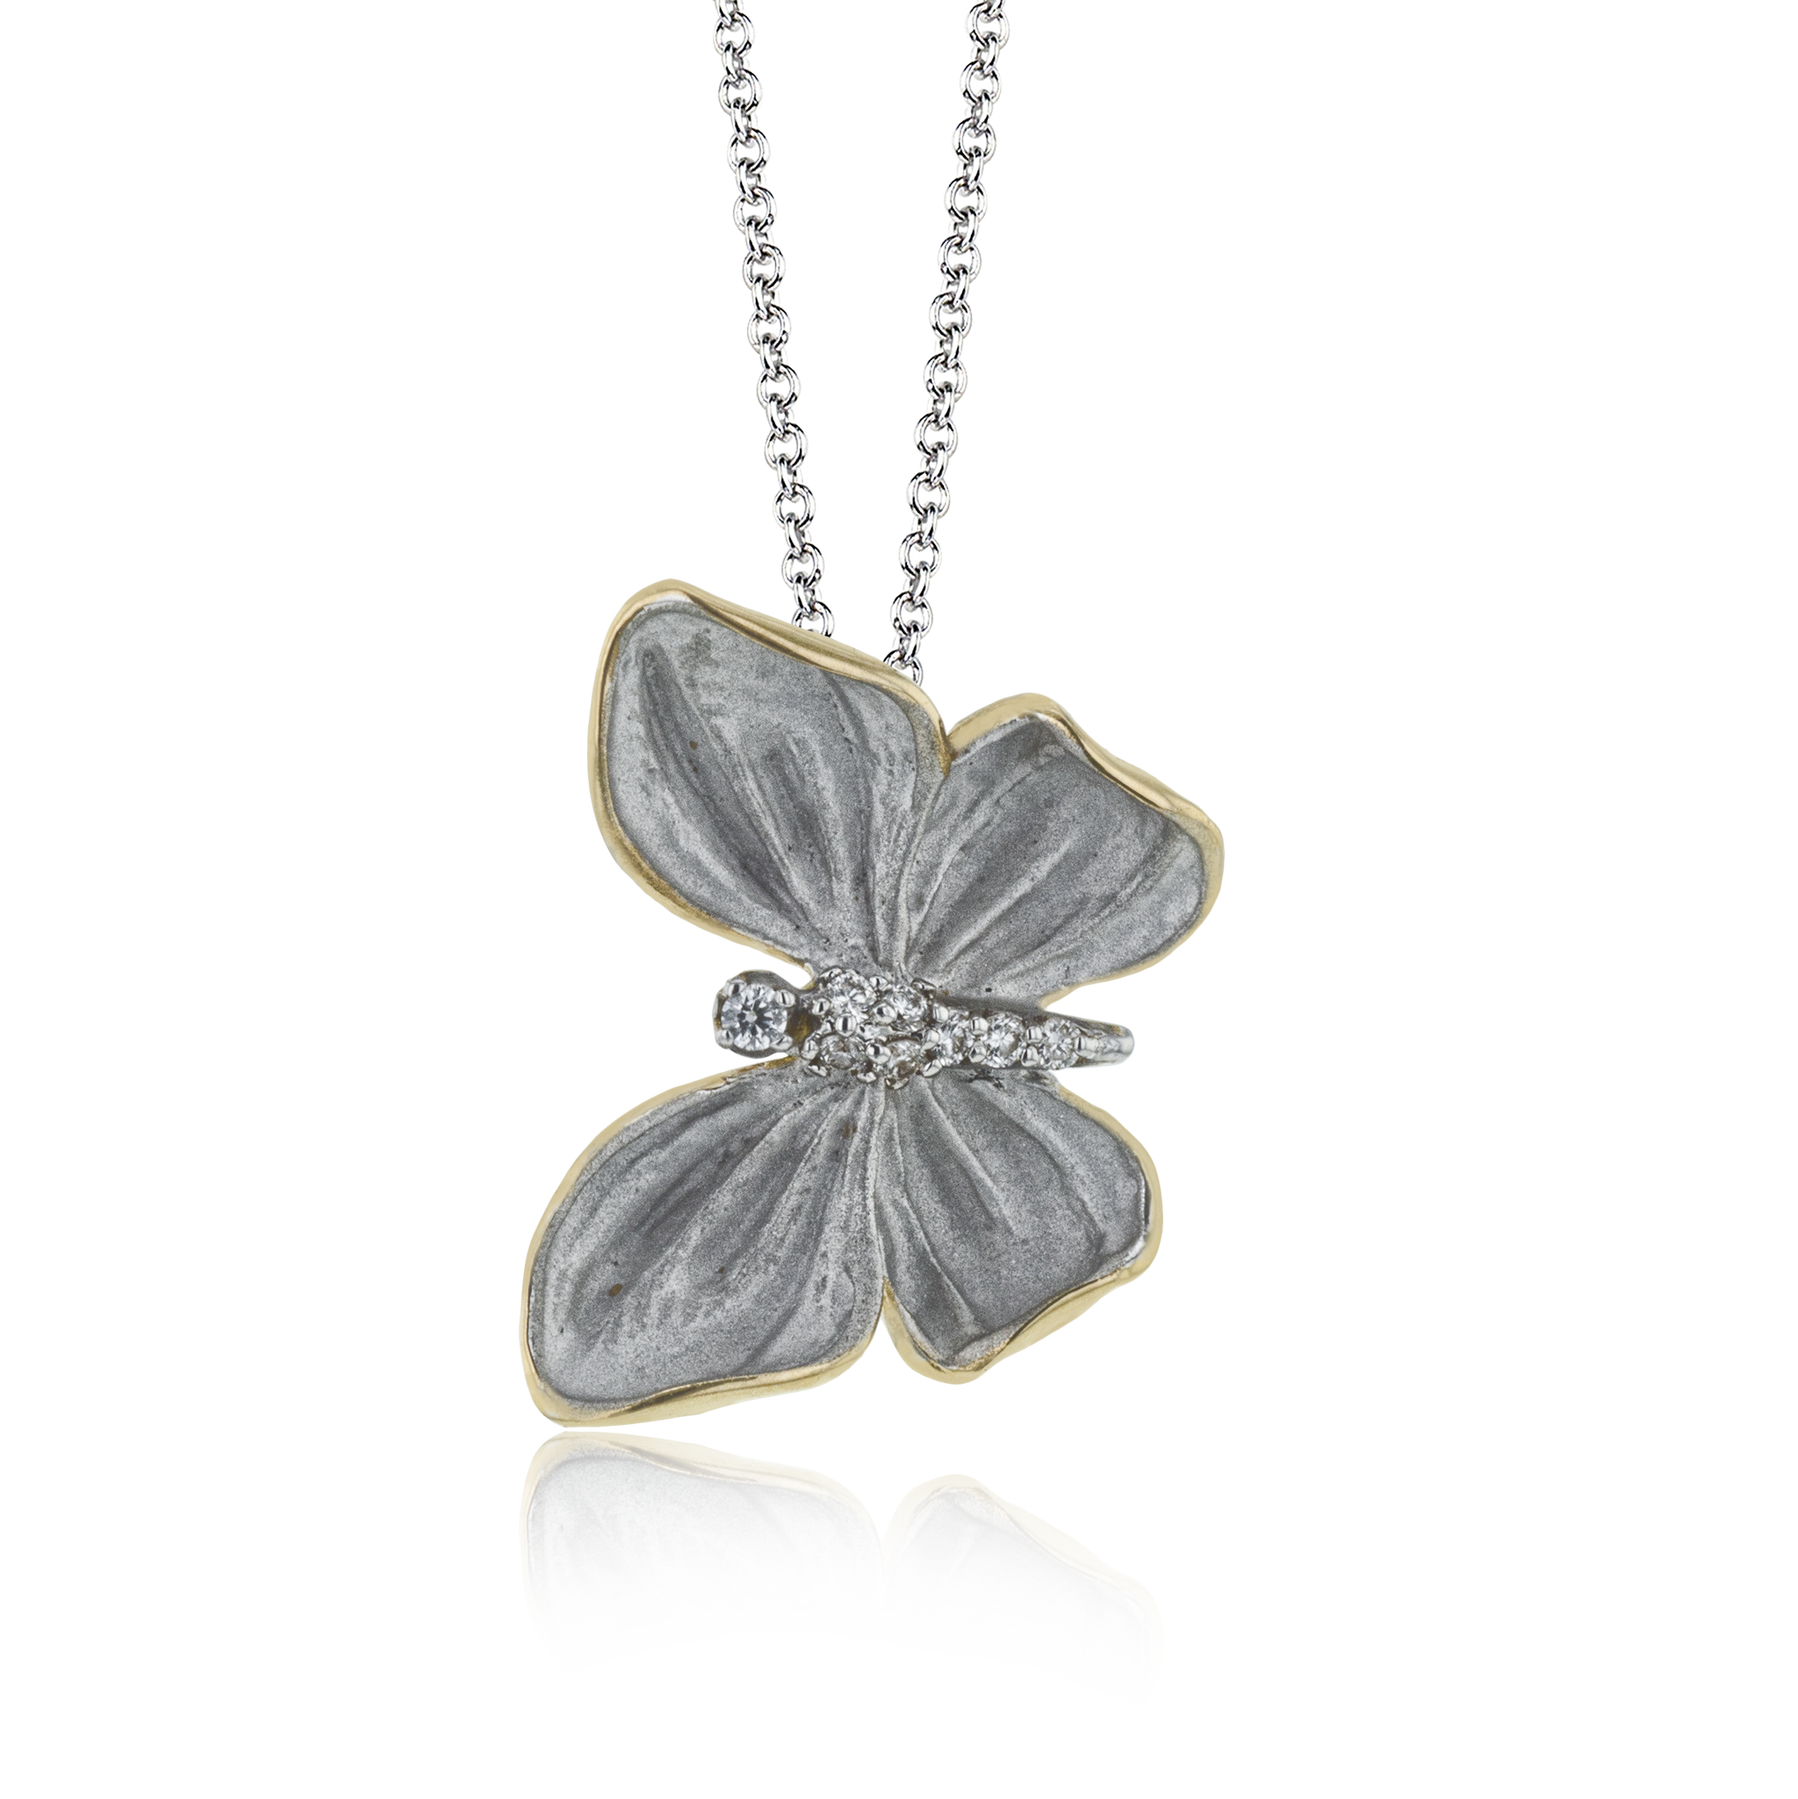 Monarch Butterfly Pendant Necklace in 18k Gold with Diamonds DP267-G